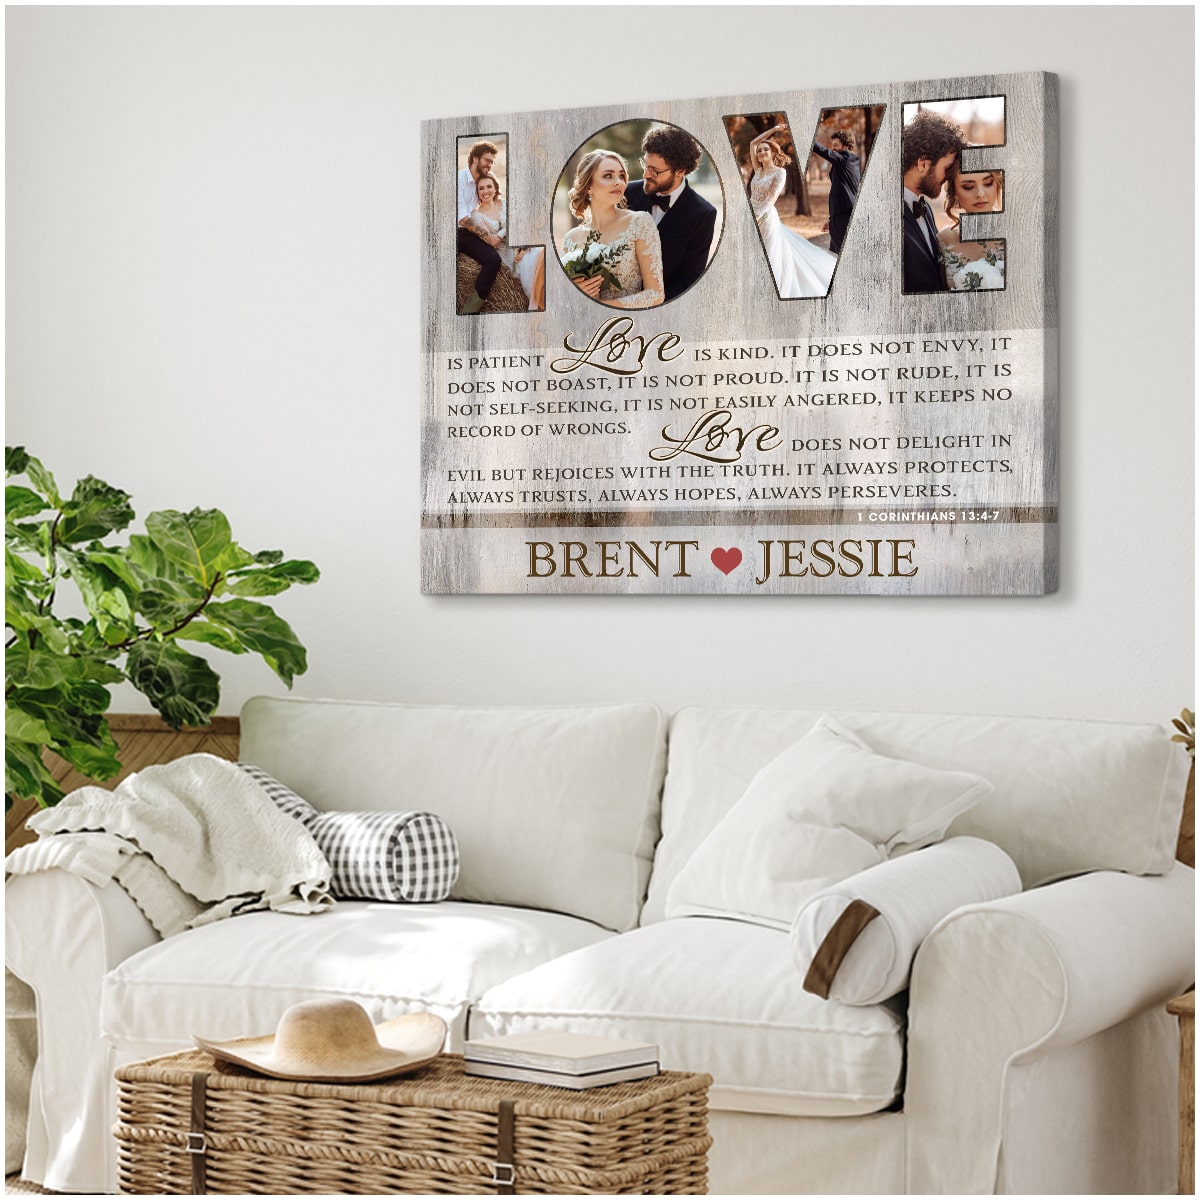 Wedding Gift Ideas Personalized Attractive Unique Gift For Newly Married  Couple - Oh Canvas